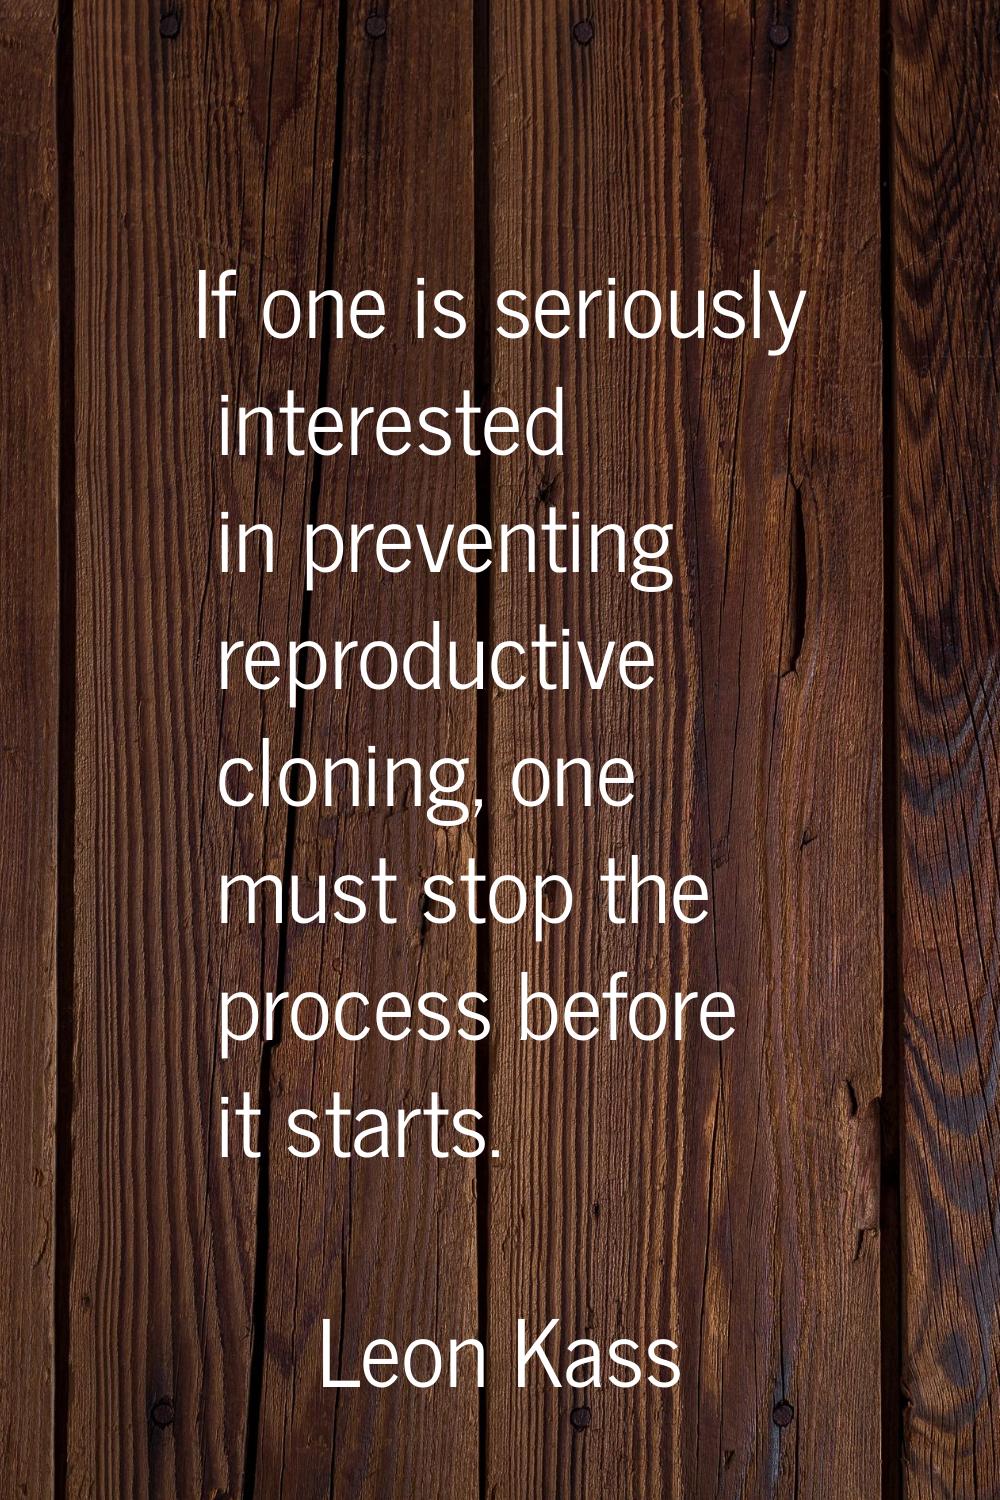 If one is seriously interested in preventing reproductive cloning, one must stop the process before